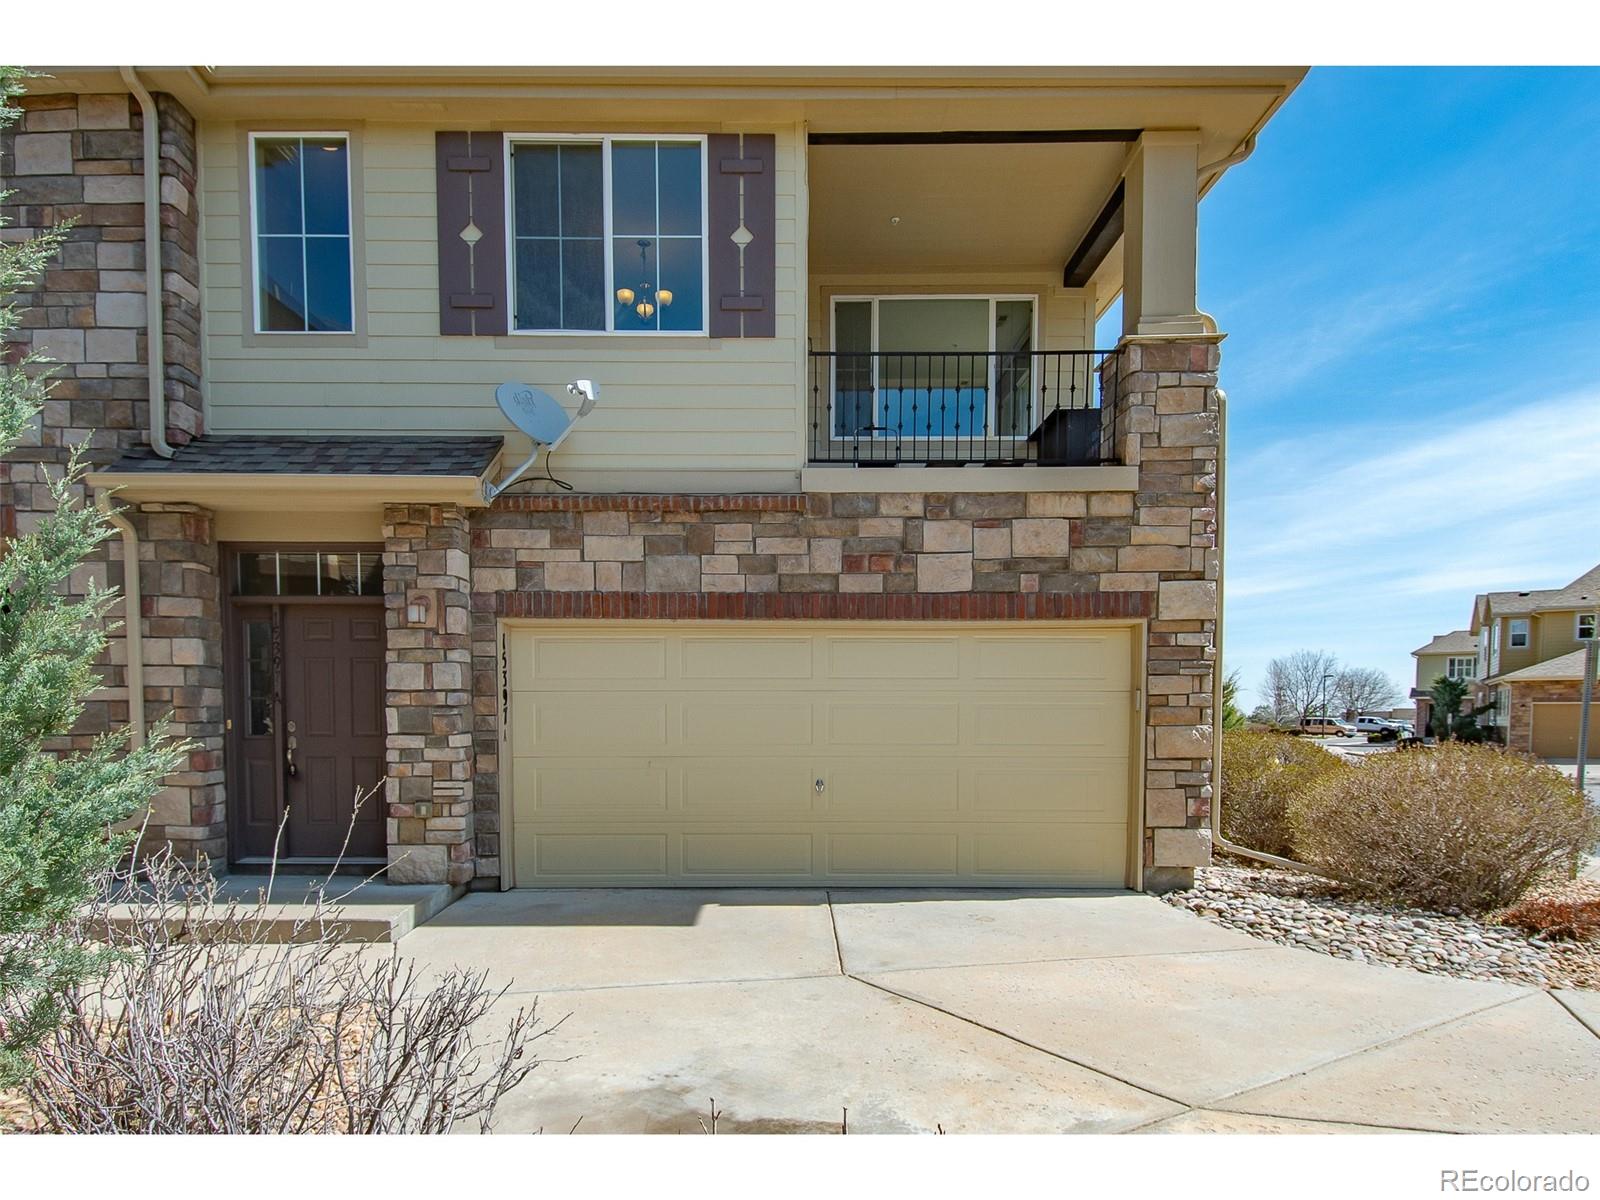 15397 W 66th Drive A, Arvada  MLS: 7733992 Beds: 2 Baths: 2 Price: $505,000